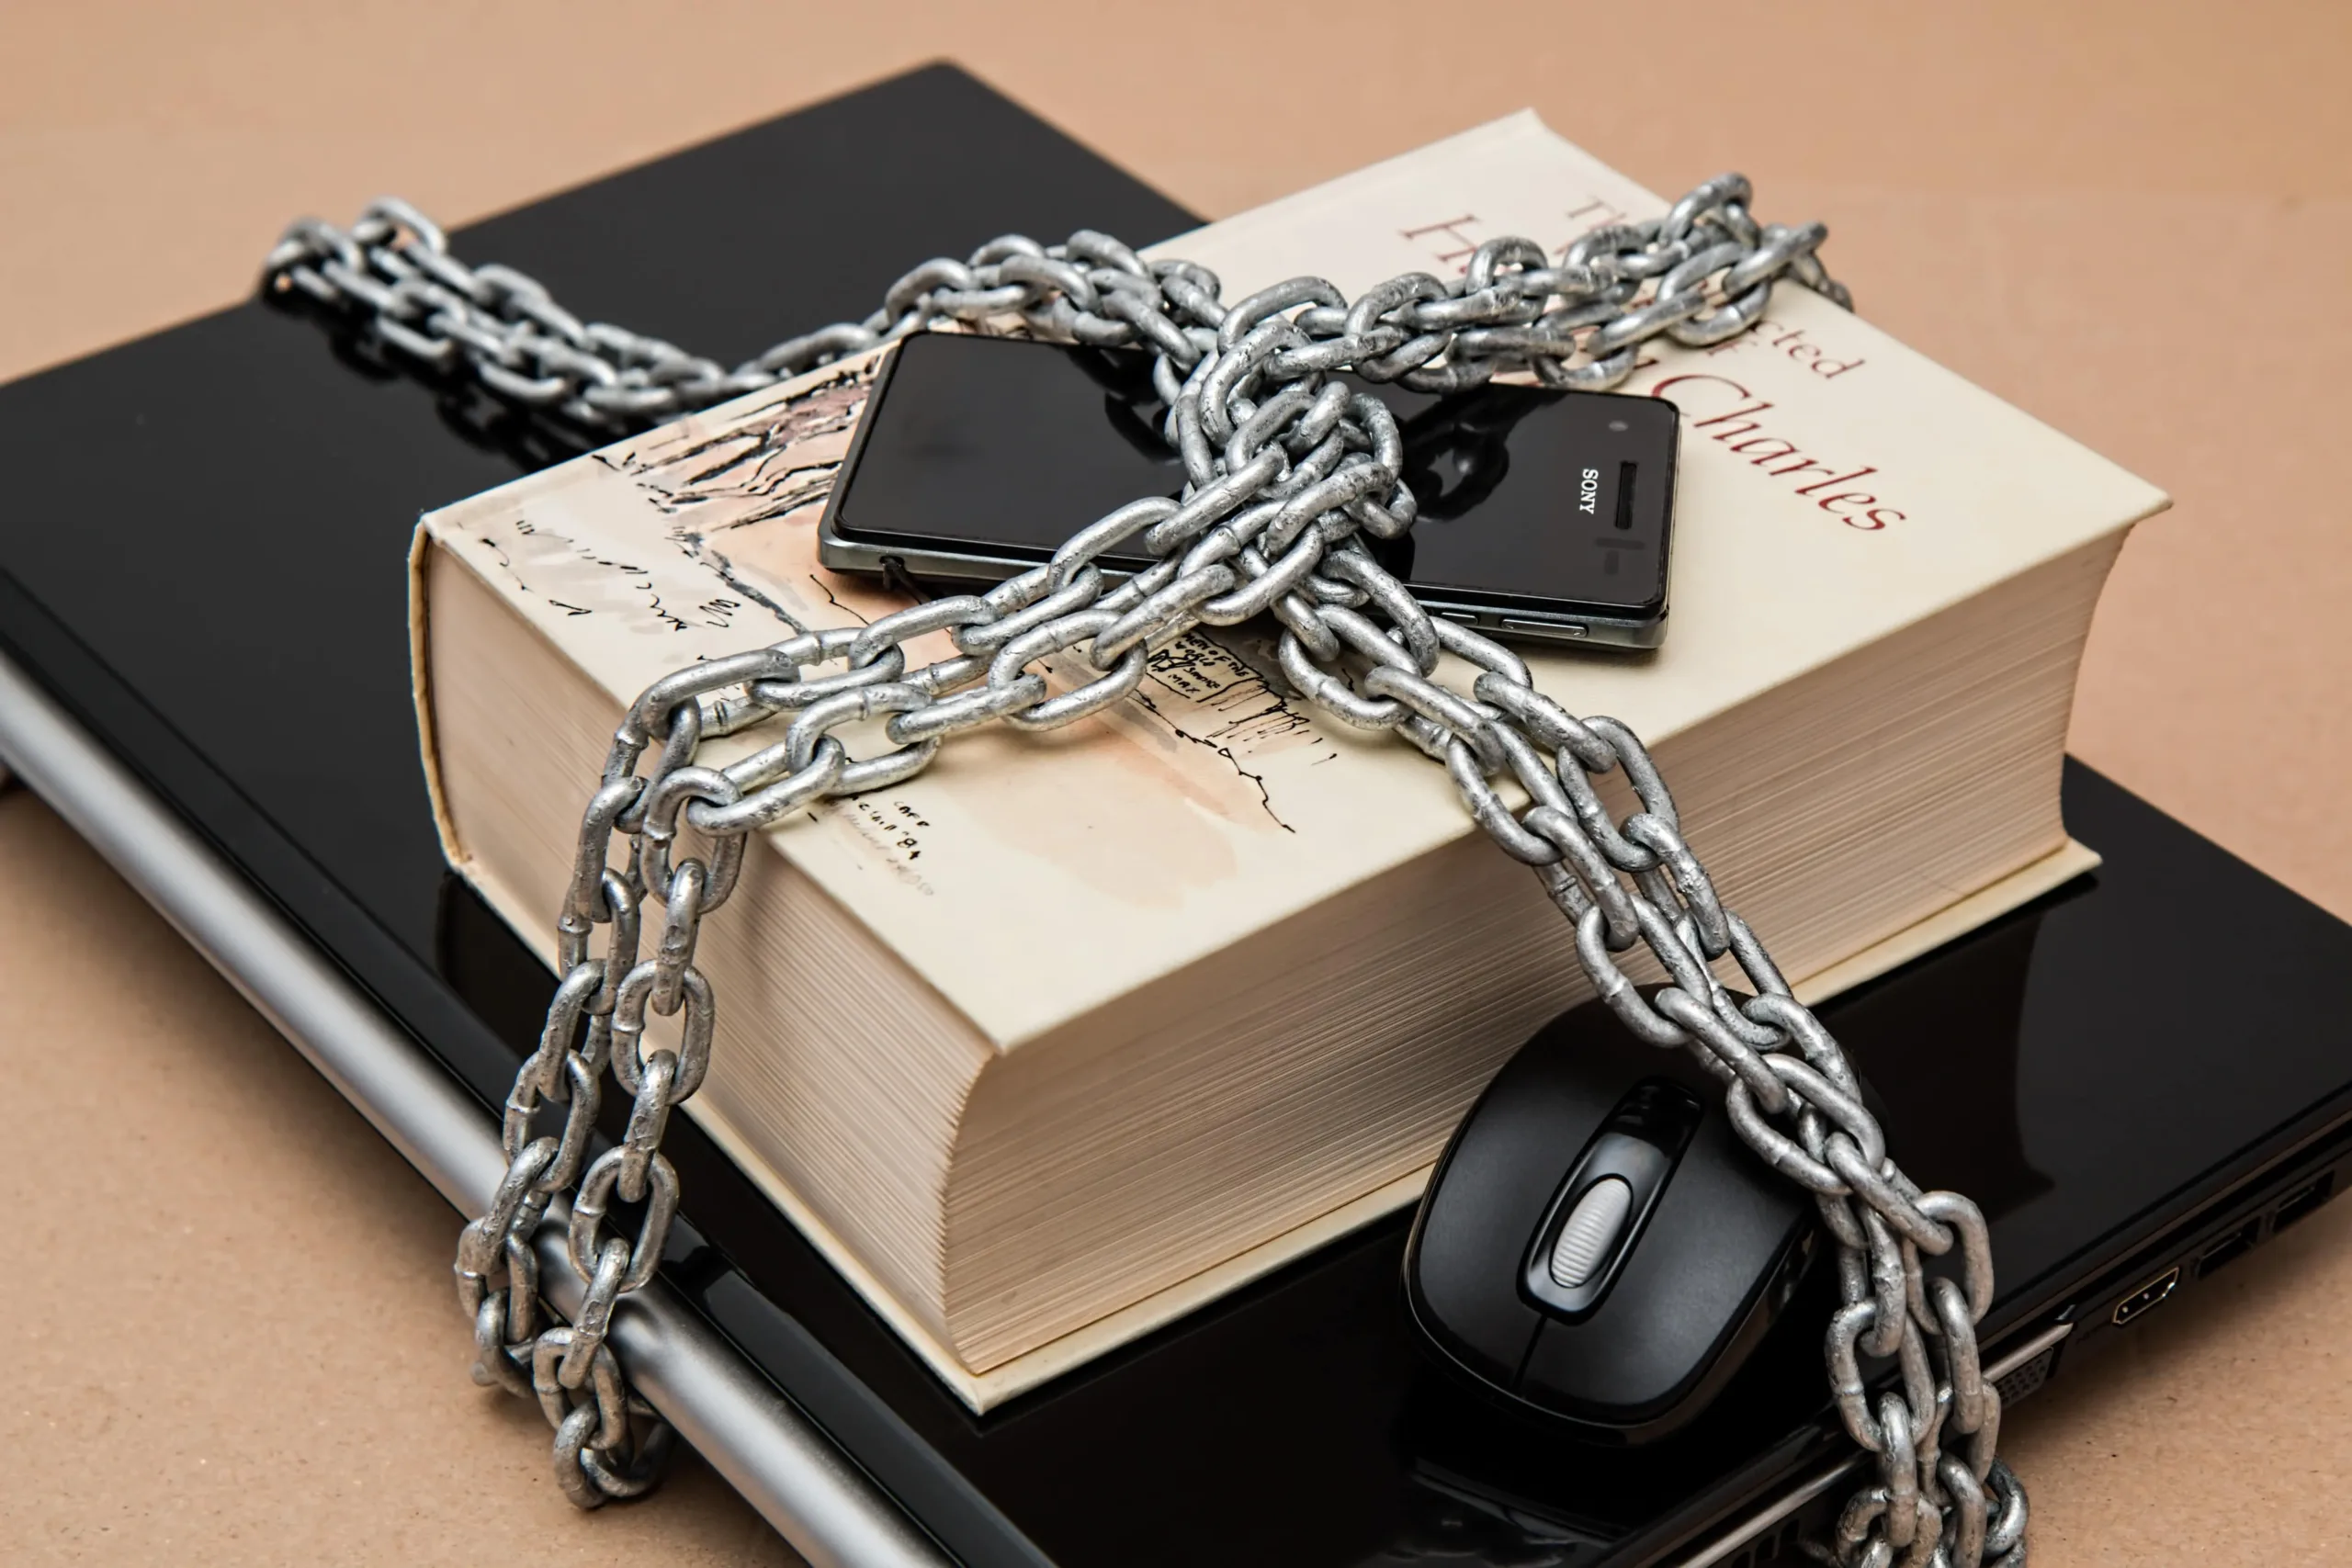 Mobile phone, Book and Laptop are locked in chain showing data security